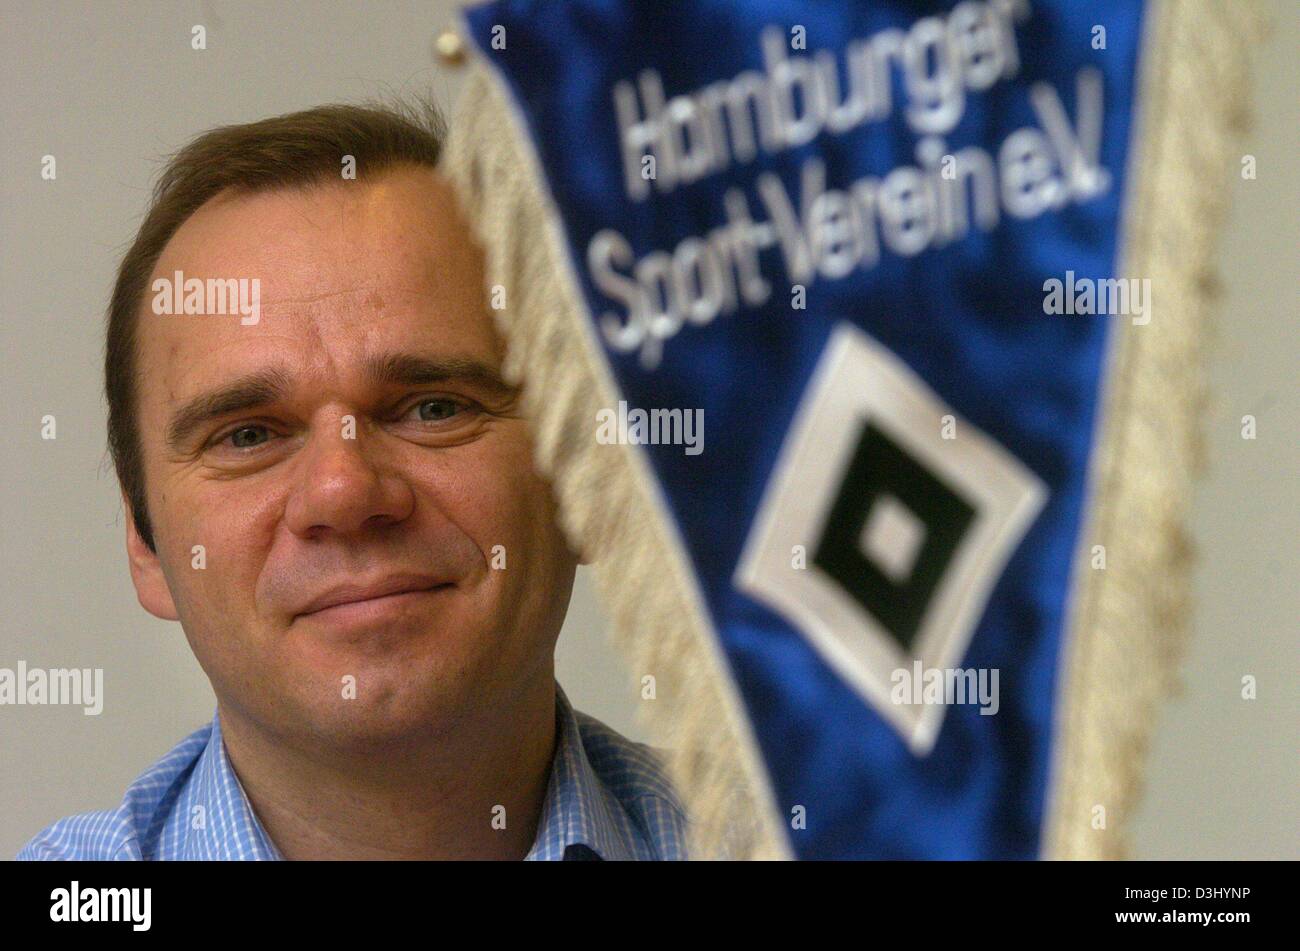 (dpa) - Bernd Hoffmann, CEO of the sports club Hamburger Sportverein (HSV), is seen behind a tennant of the club in his office at the AOL arena in Hamburg, 23 January 2004. With 41 year he is the youngest head of a German Bundesliga soccer club and celebrates his first anniversary in office in February. Stock Photo